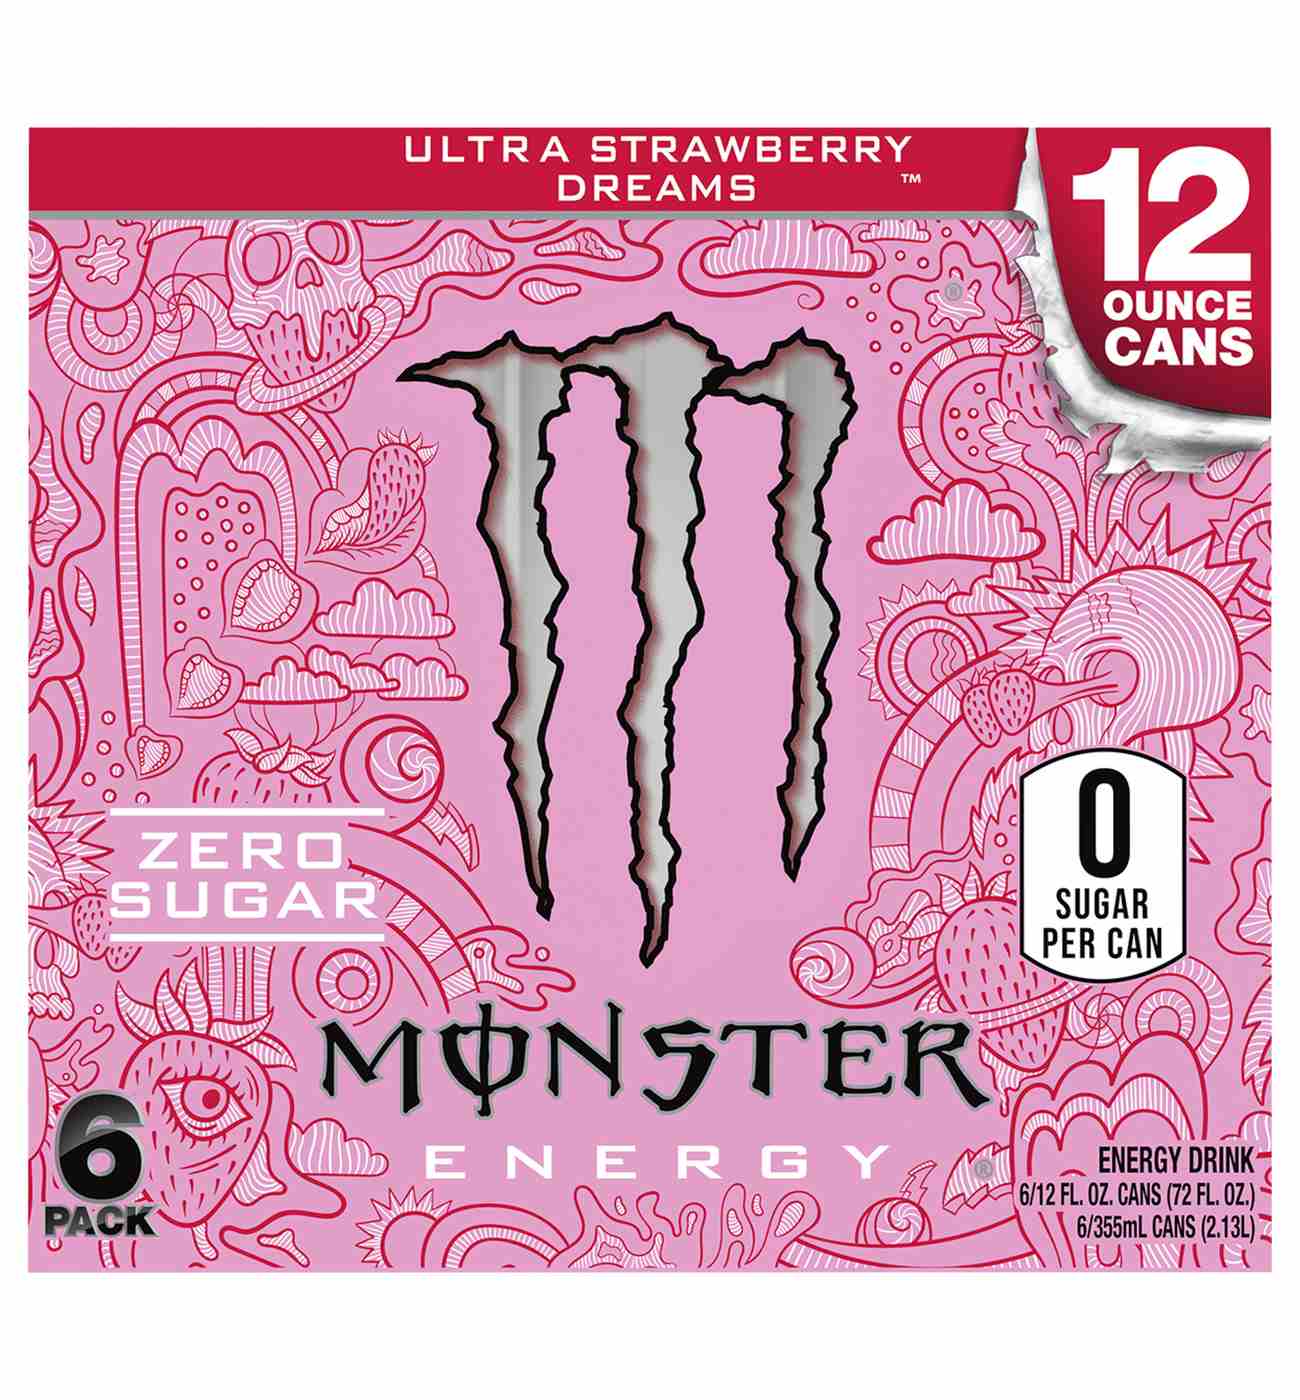 Monster Energy Ultra Strawberry Dreams Energy Drink 12 oz Cans; image 1 of 2